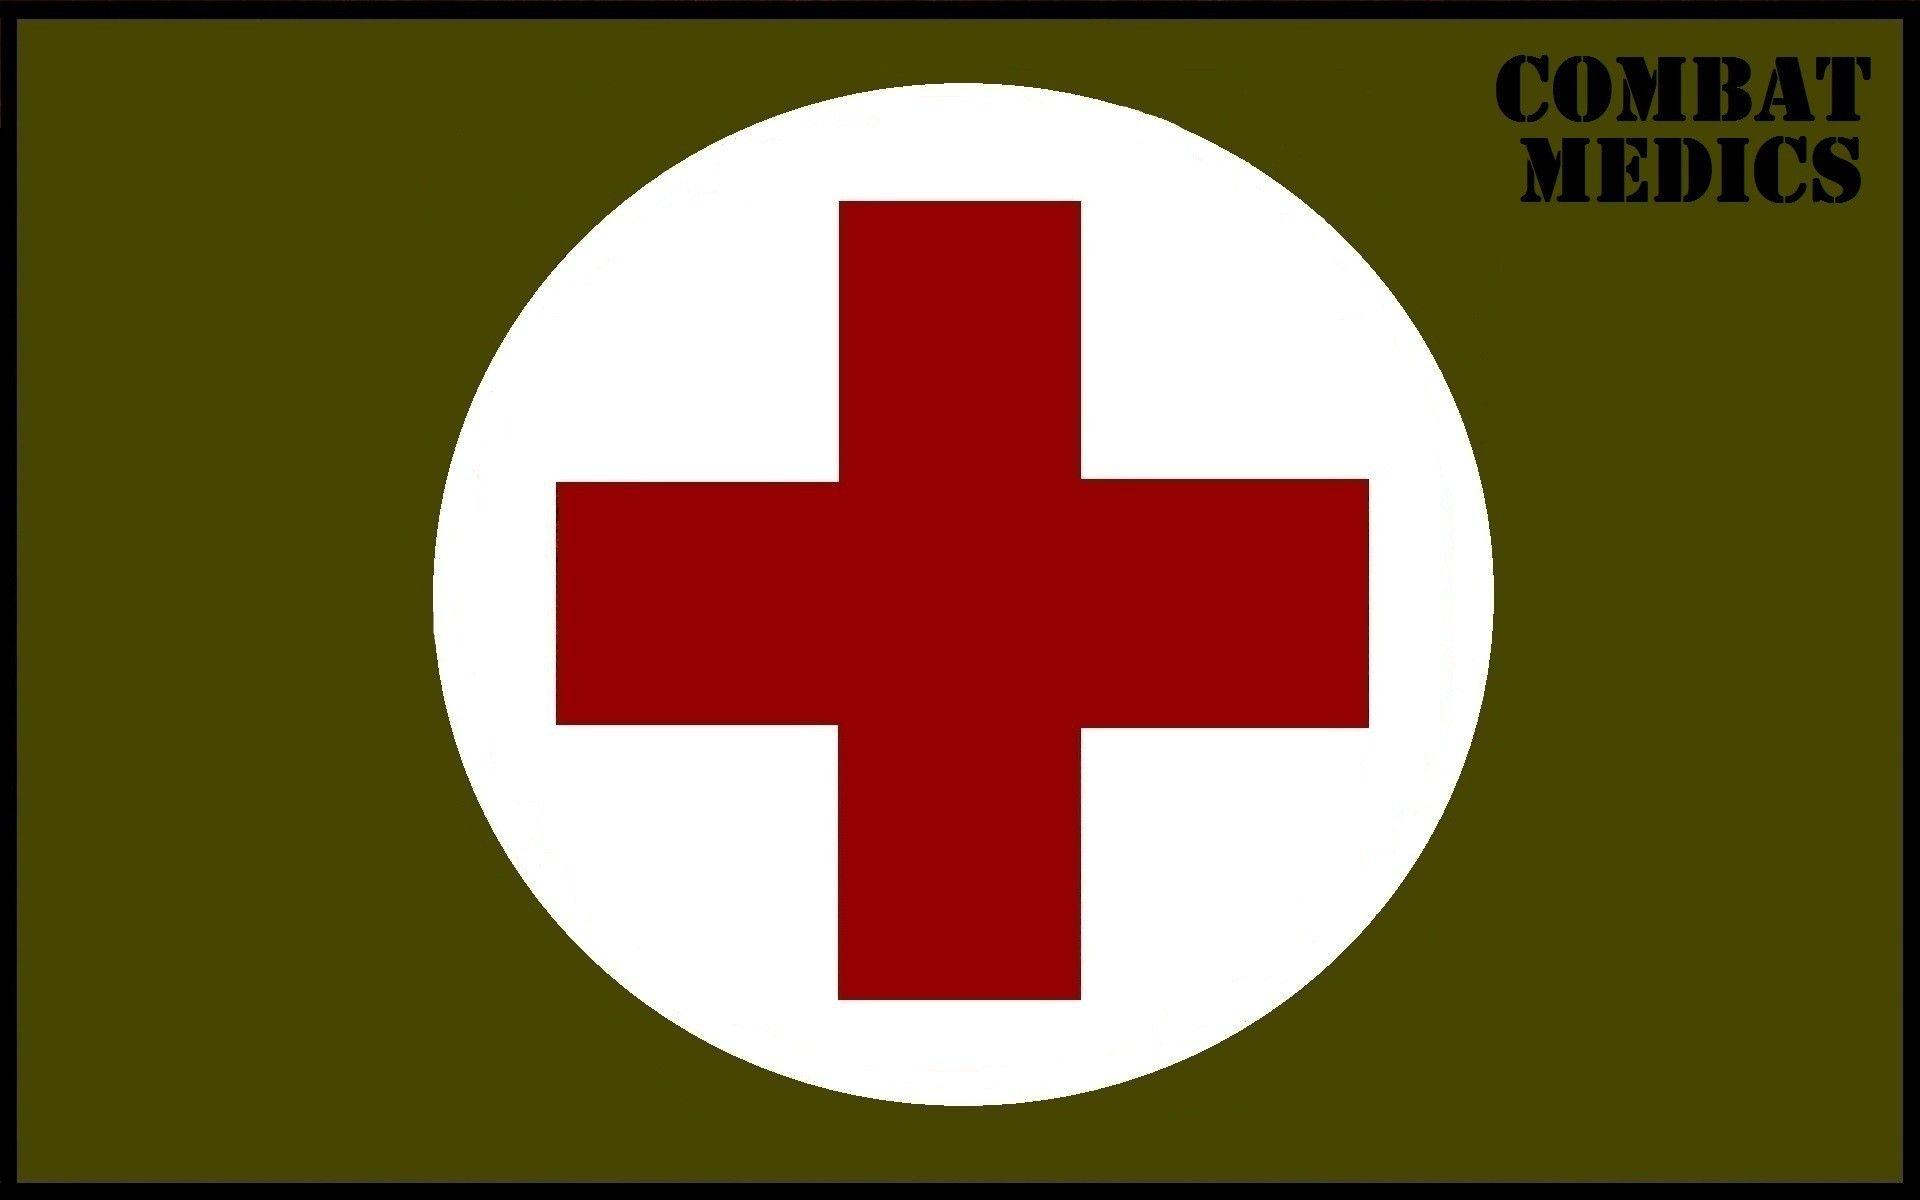 Army Red Cross Logo - Download Army Medic Wallpaper 1920x1200